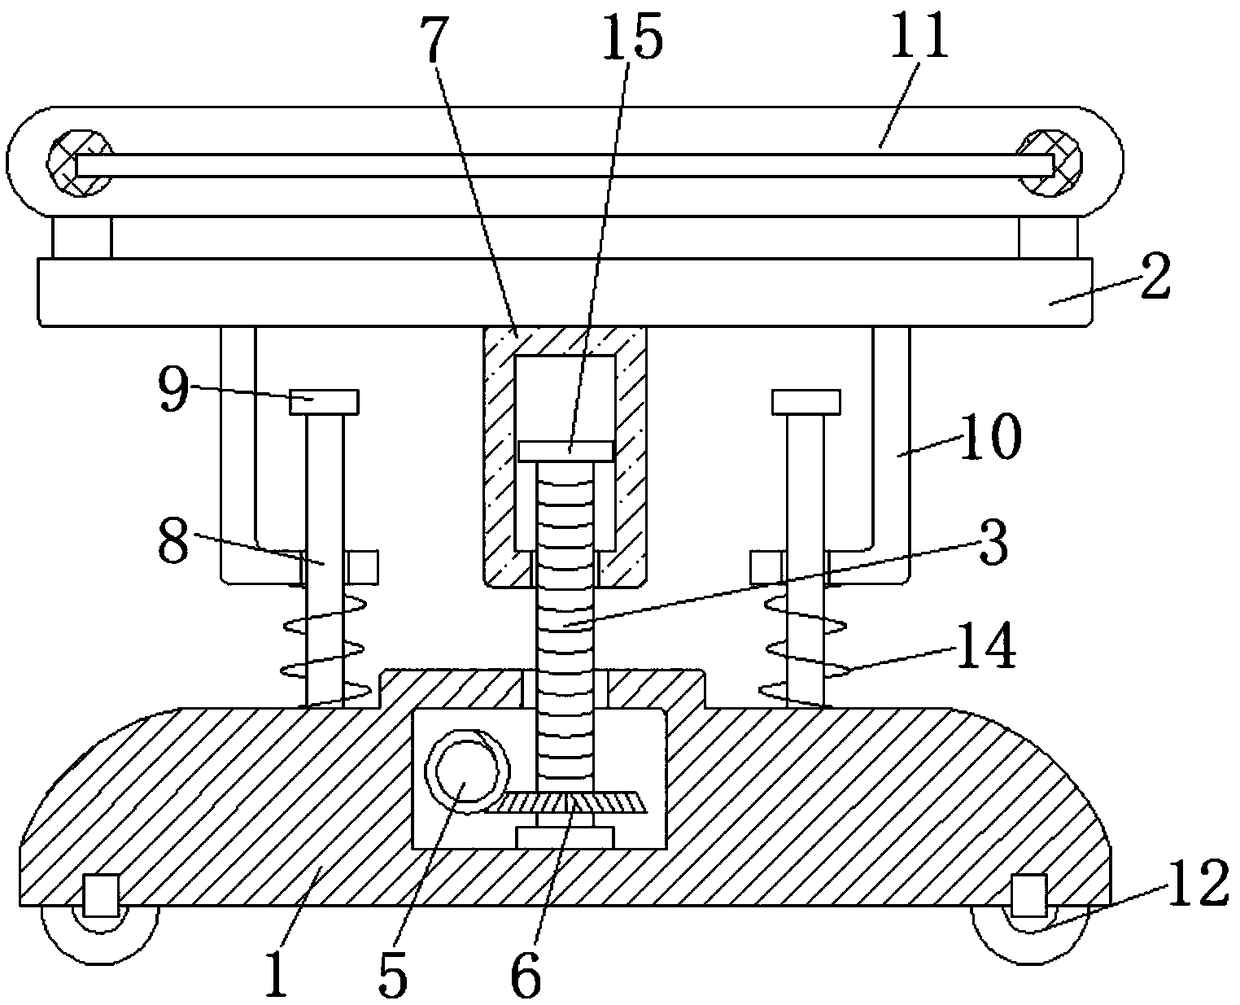 Feeding device of automatic mechanical arm of numerical control machine tool